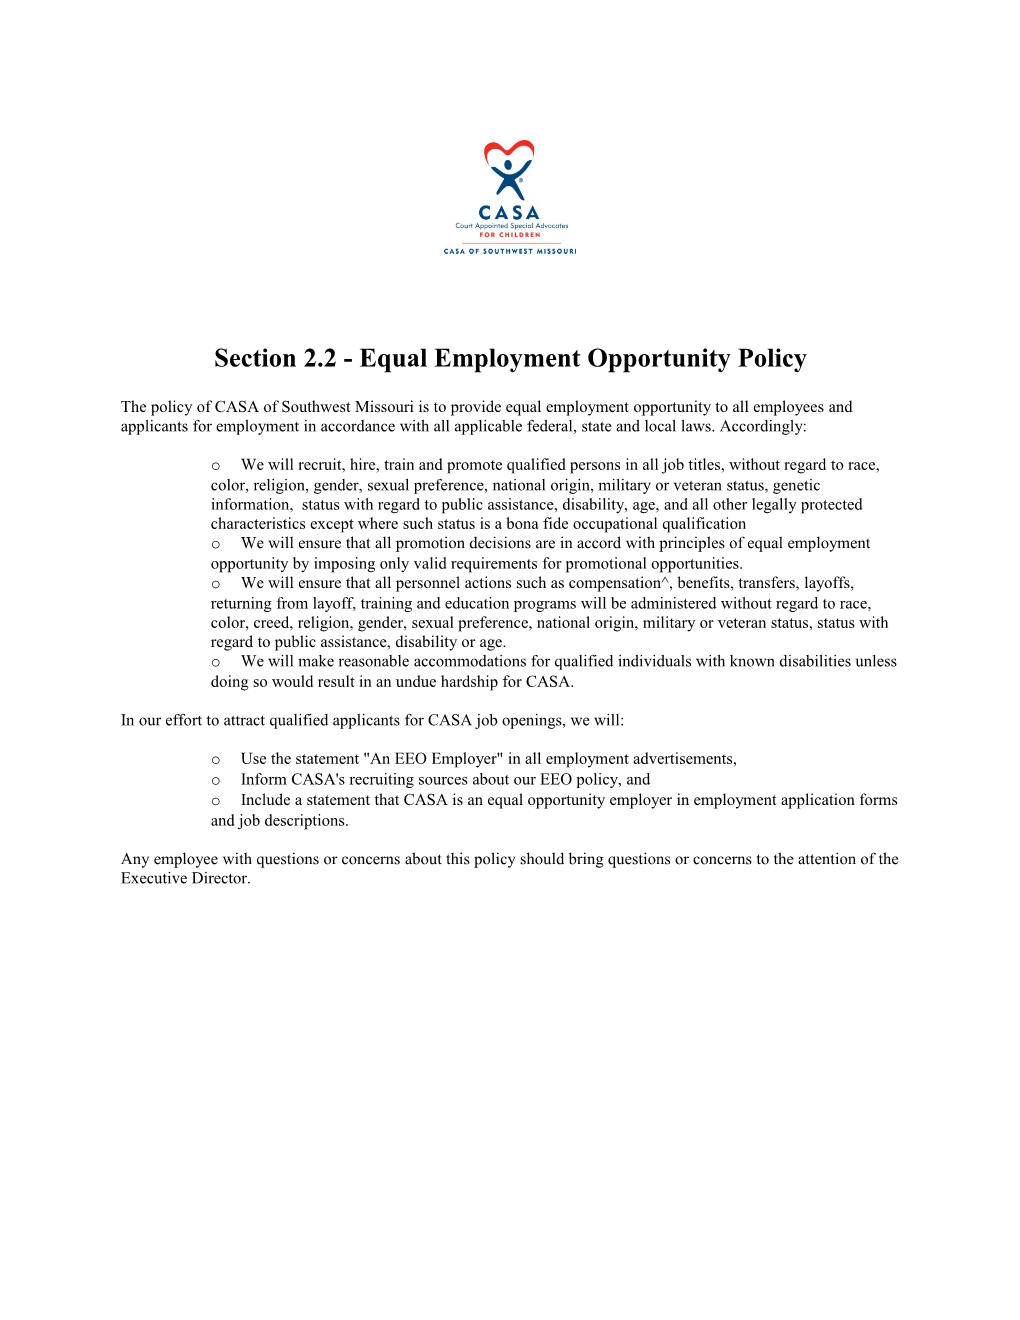 Section 2.2 - Equal Employment Opportunity Policy